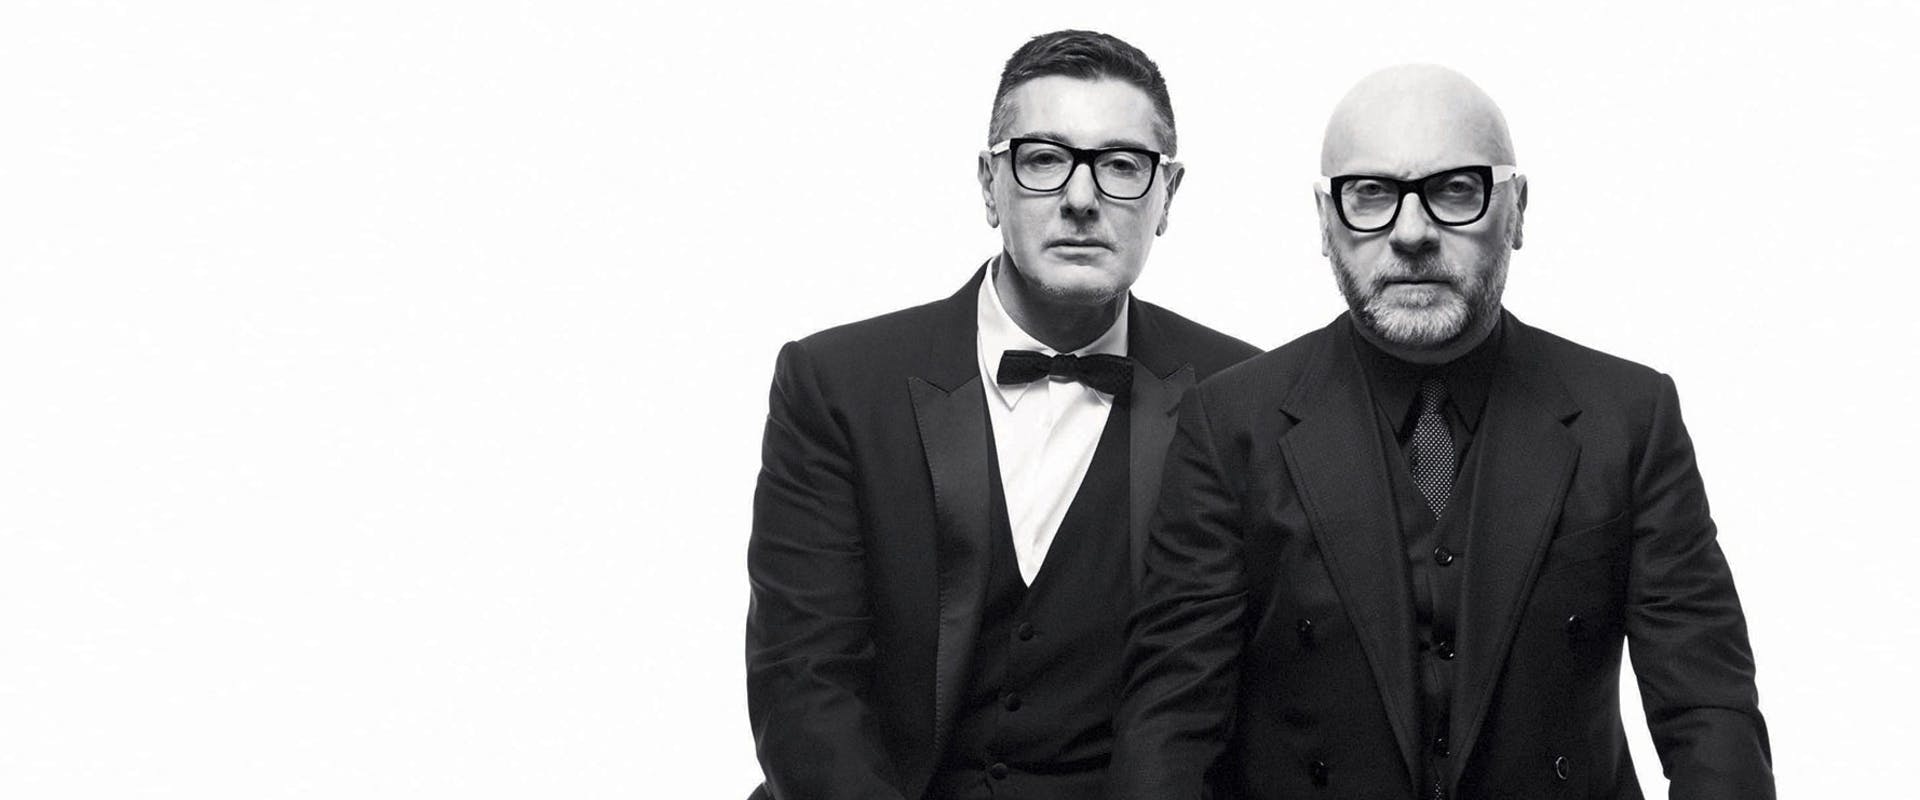 Dolce and Gabbana want to leave the 